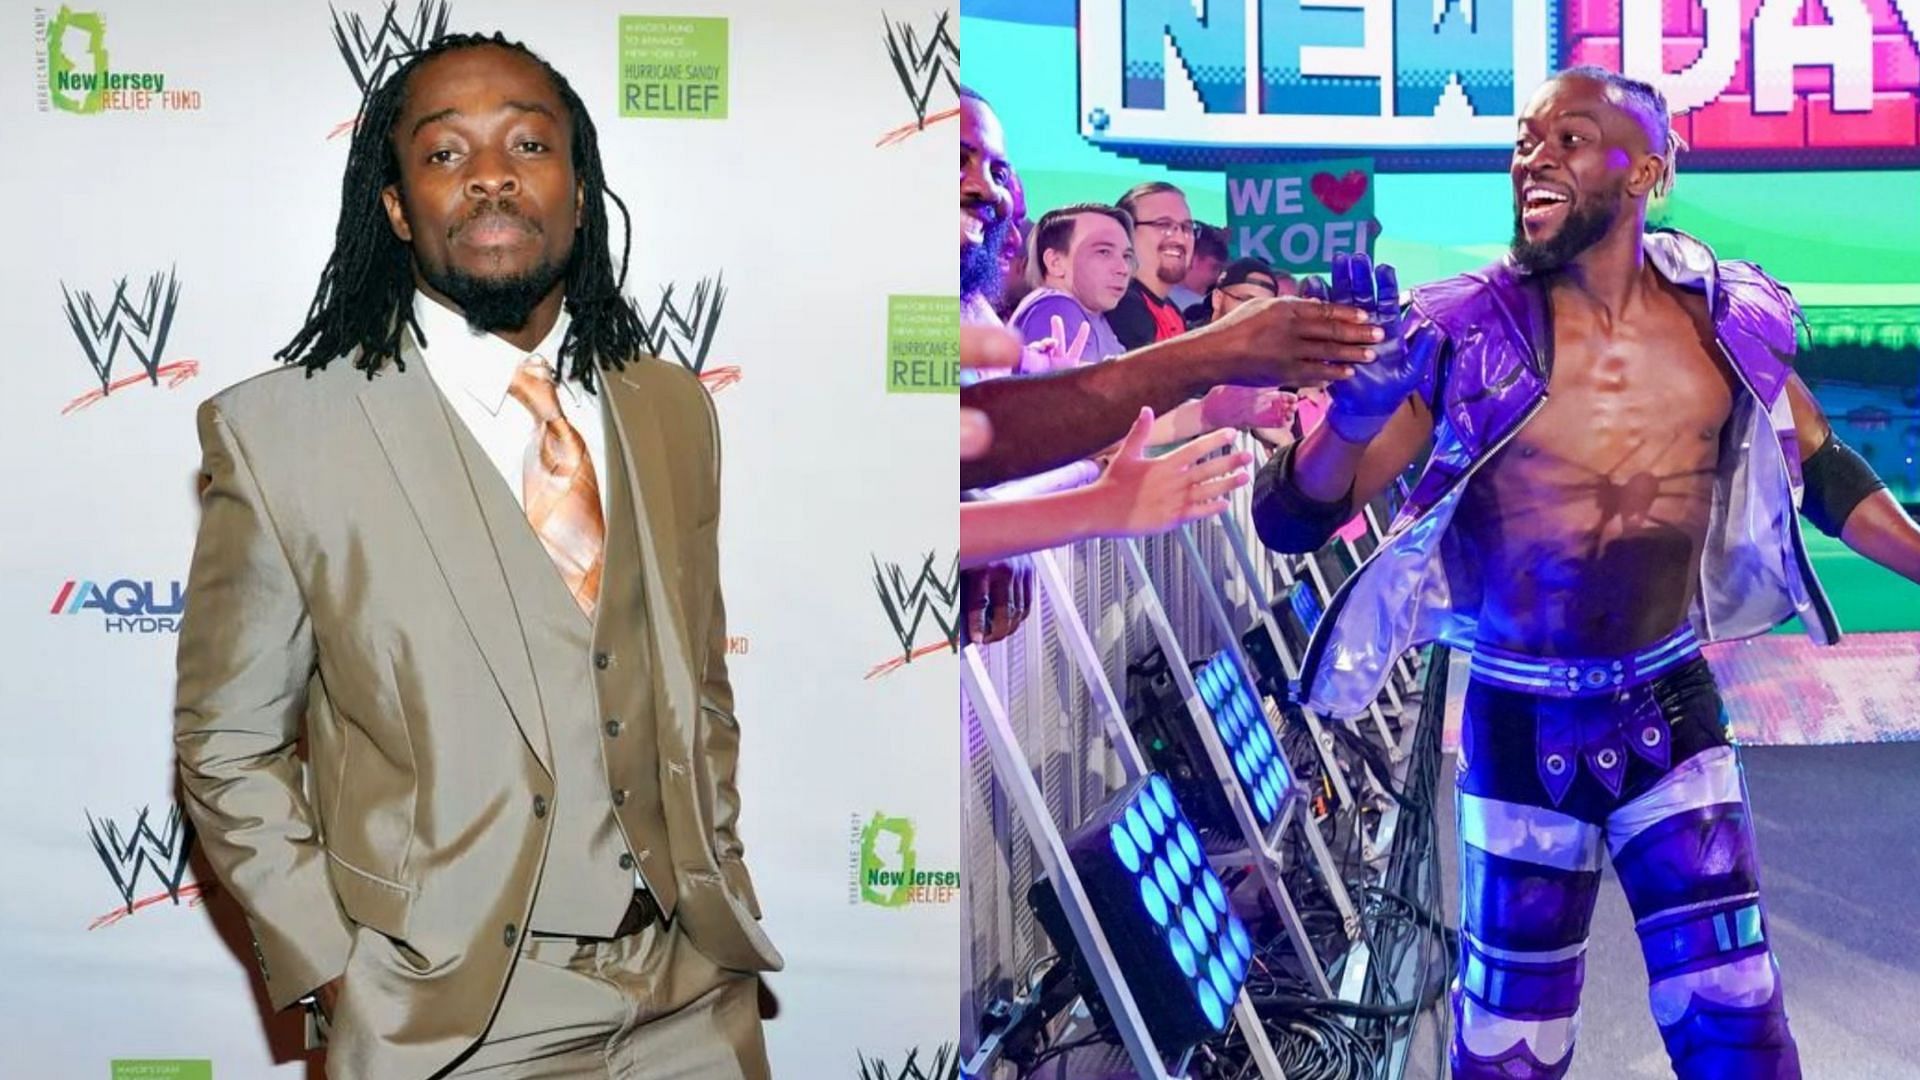 Kofi Kingston worked at Staples before becoming a WWE Superstar